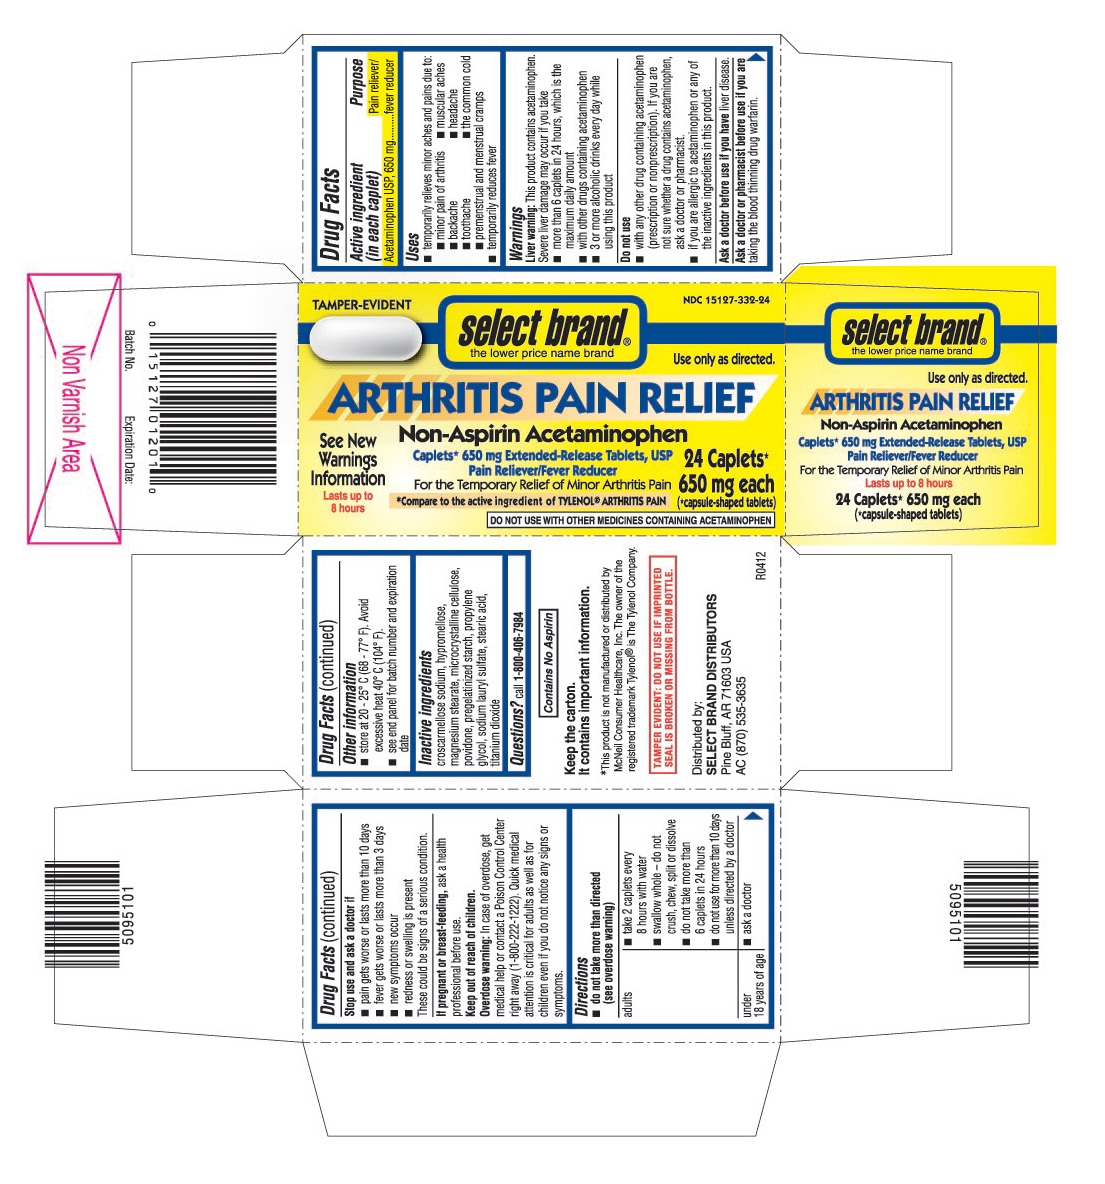 This is the 24 count blister carton label for Select Brand Acetaminophen extended-release tablets, USP 650 mg.